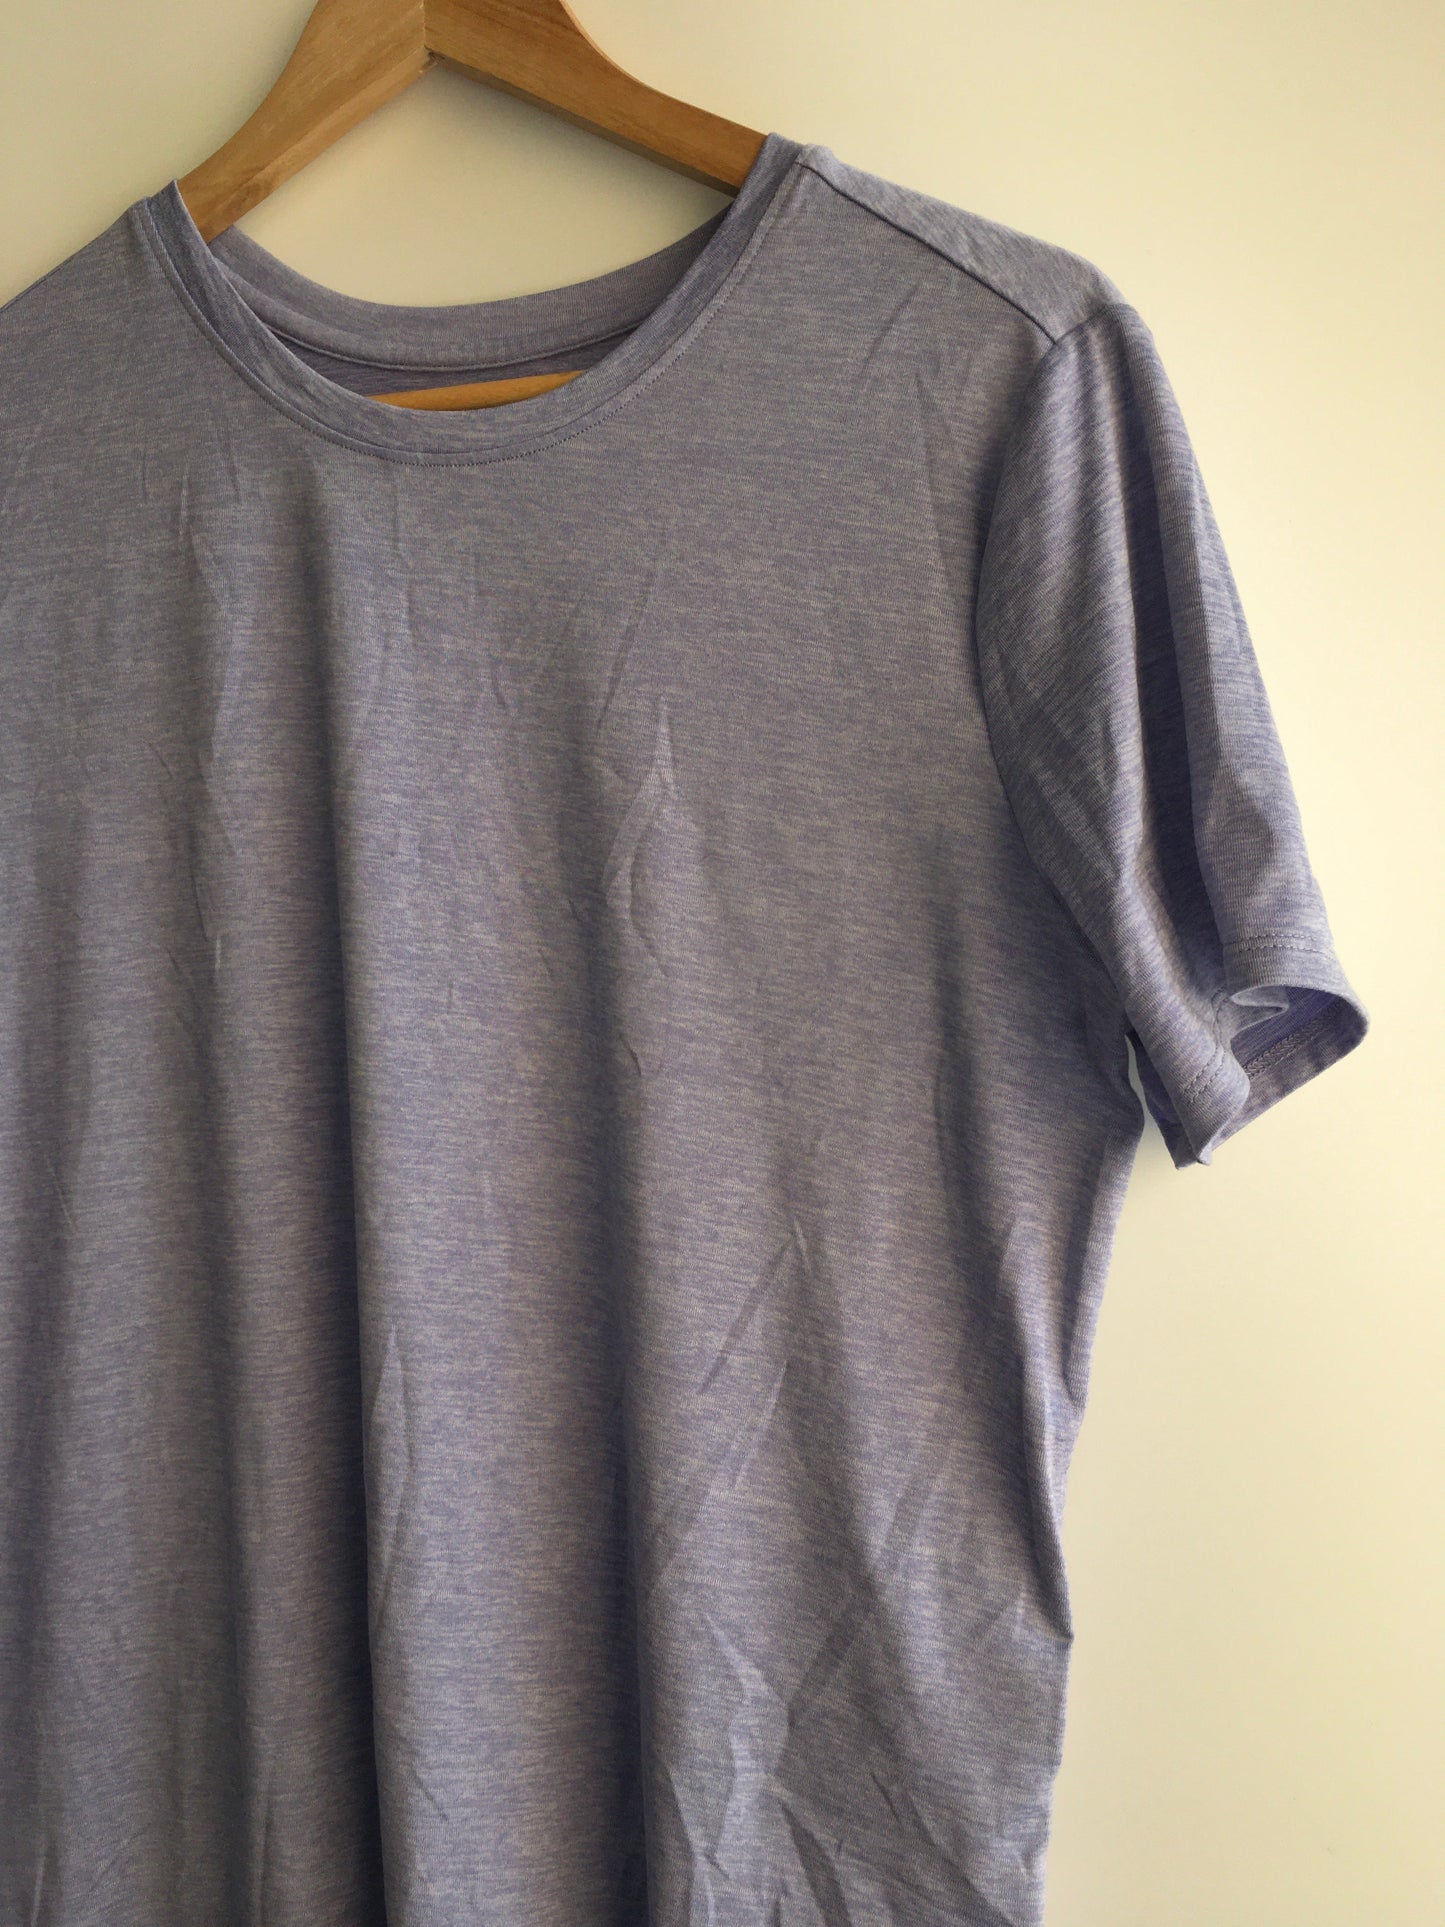 Athletic Top Short Sleeve By Skechers  Size: M